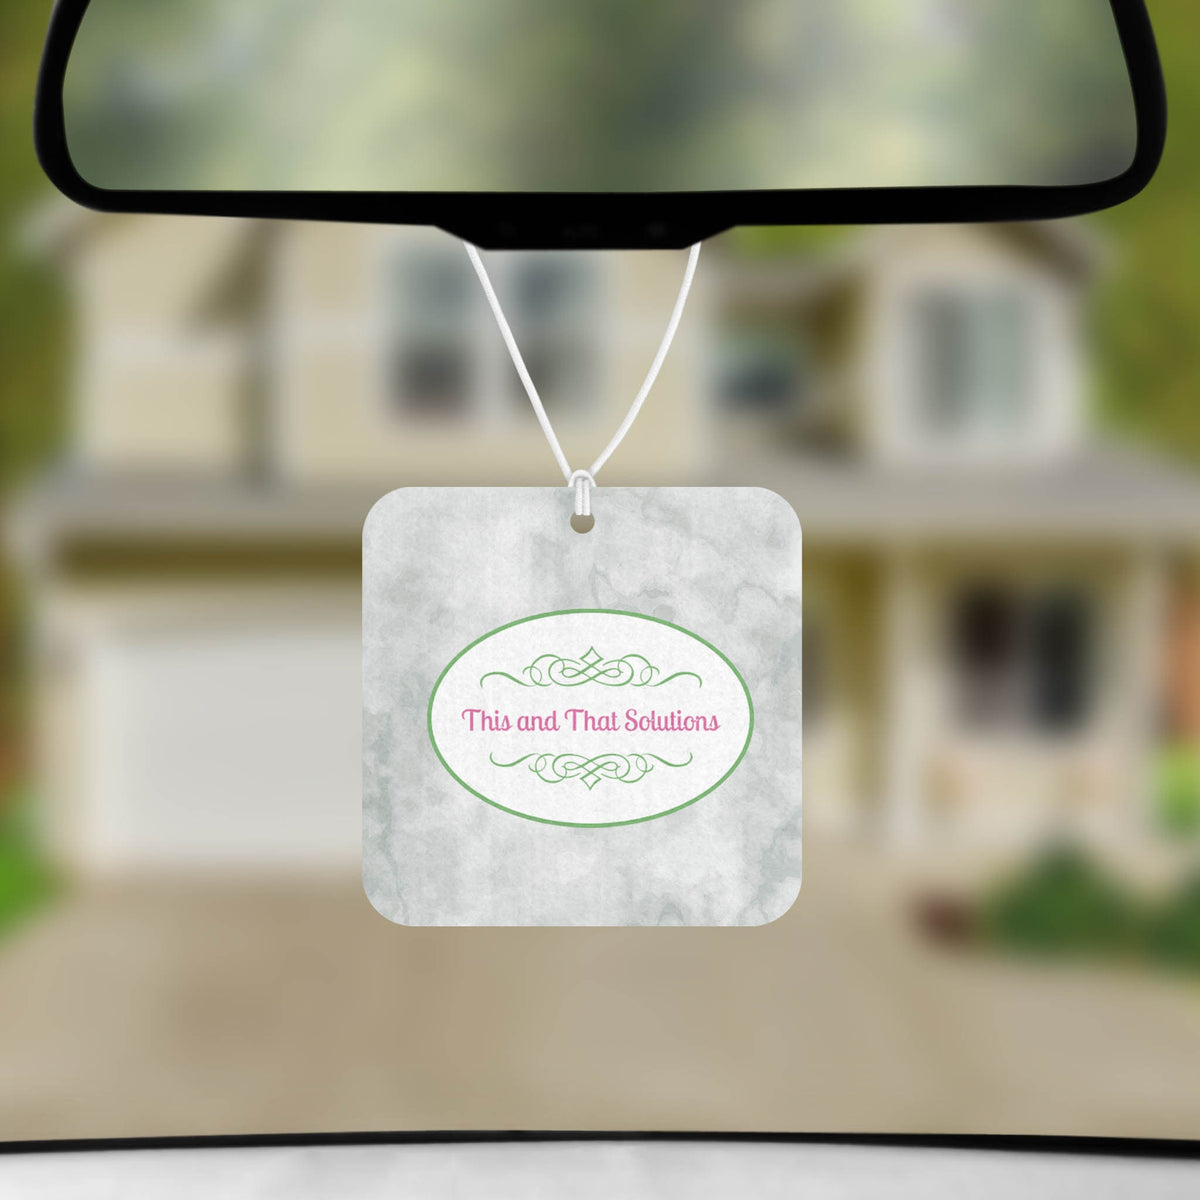 Personalized Air Fresheners | Set of 2 | Custom Car Accessories | Company Logo